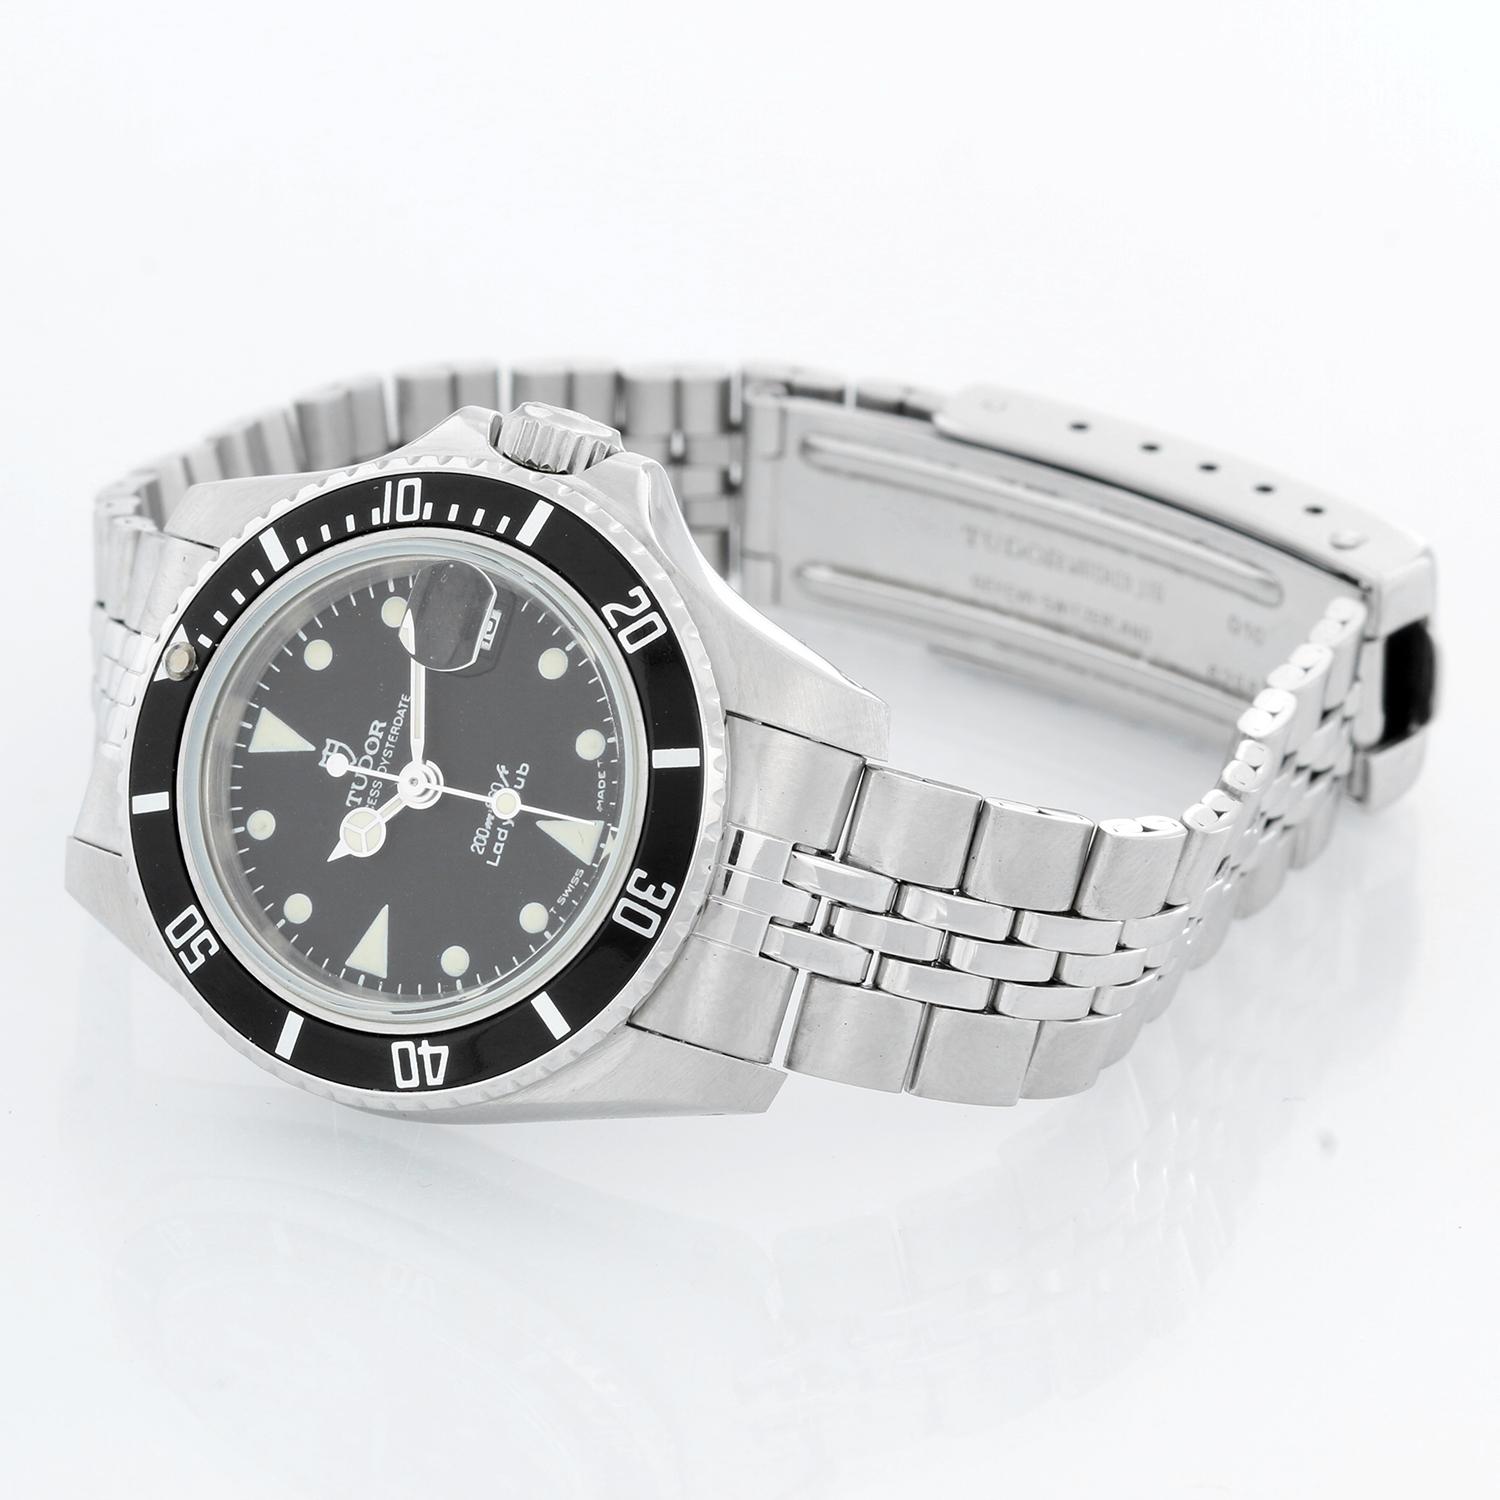 Tudor Ladies Submariner Stainless Steel Watch Ref. 96090 - Automatic winding. Stainless steel case with time lapse rotating bezel (26mm diameter). Black dial with white hour markers. Stainless steel Jubilee style bracelet. Pre-owned with custom box.